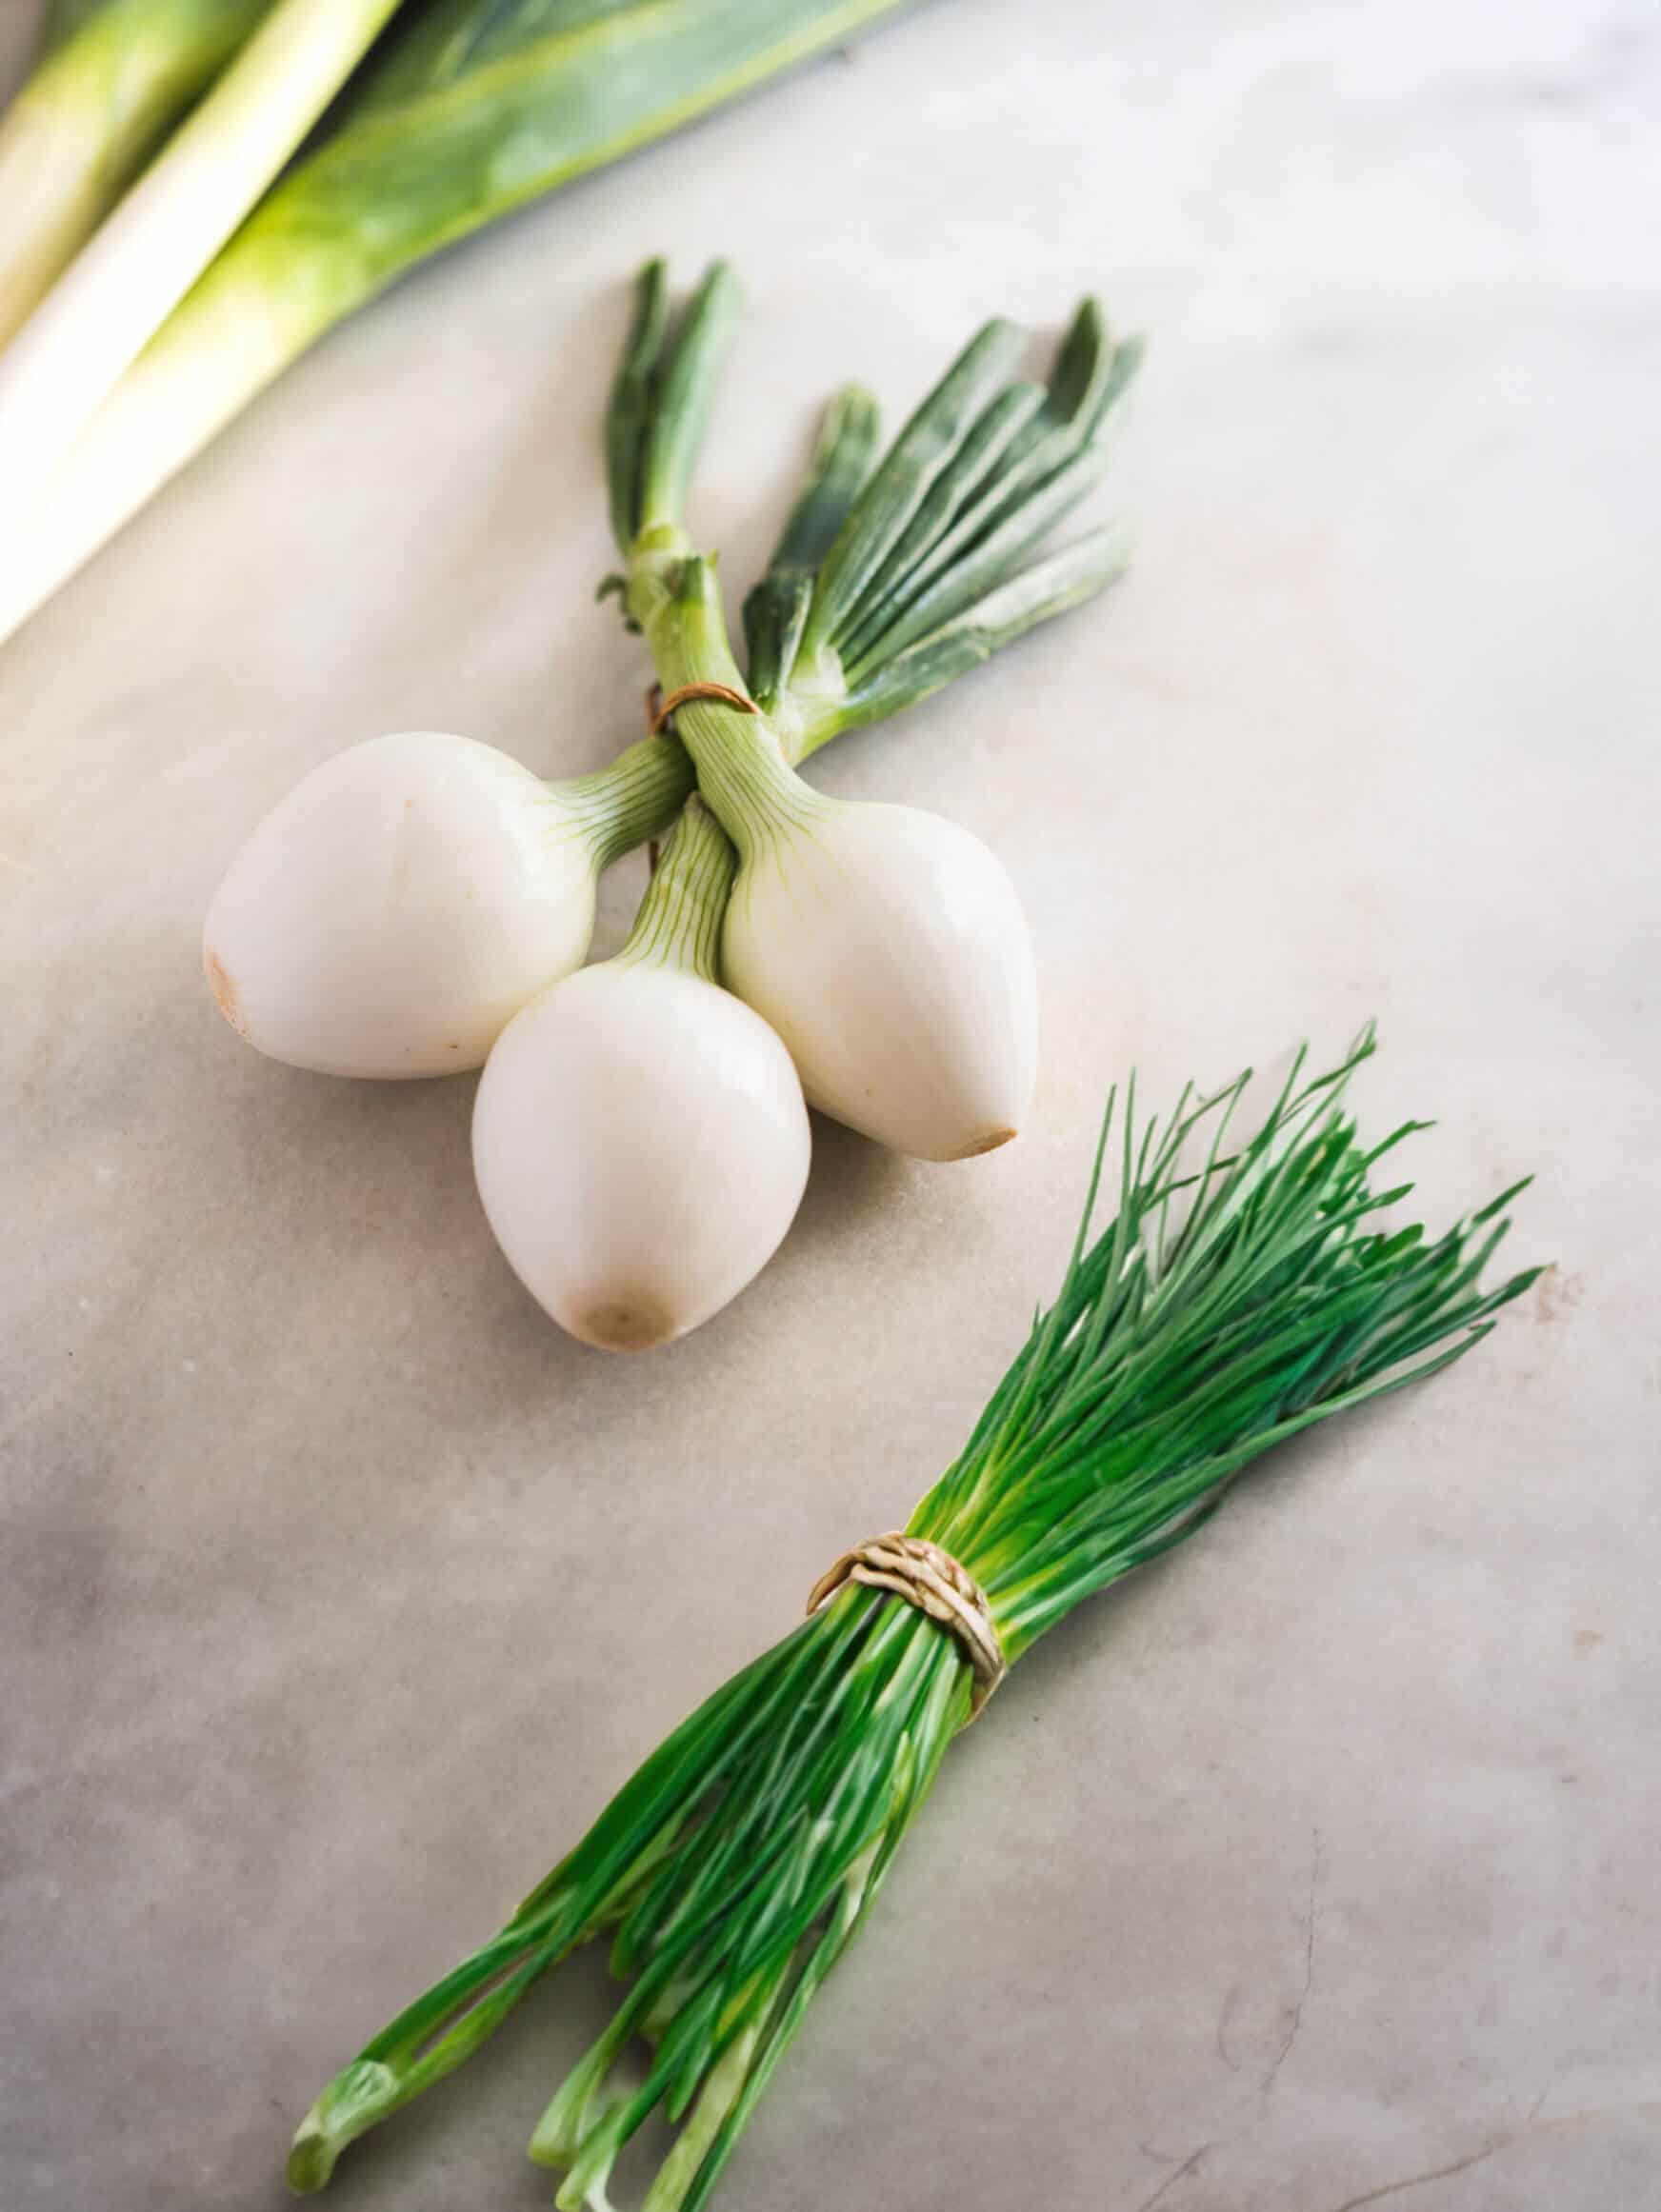 chives and green onions as substitutes of leeks.